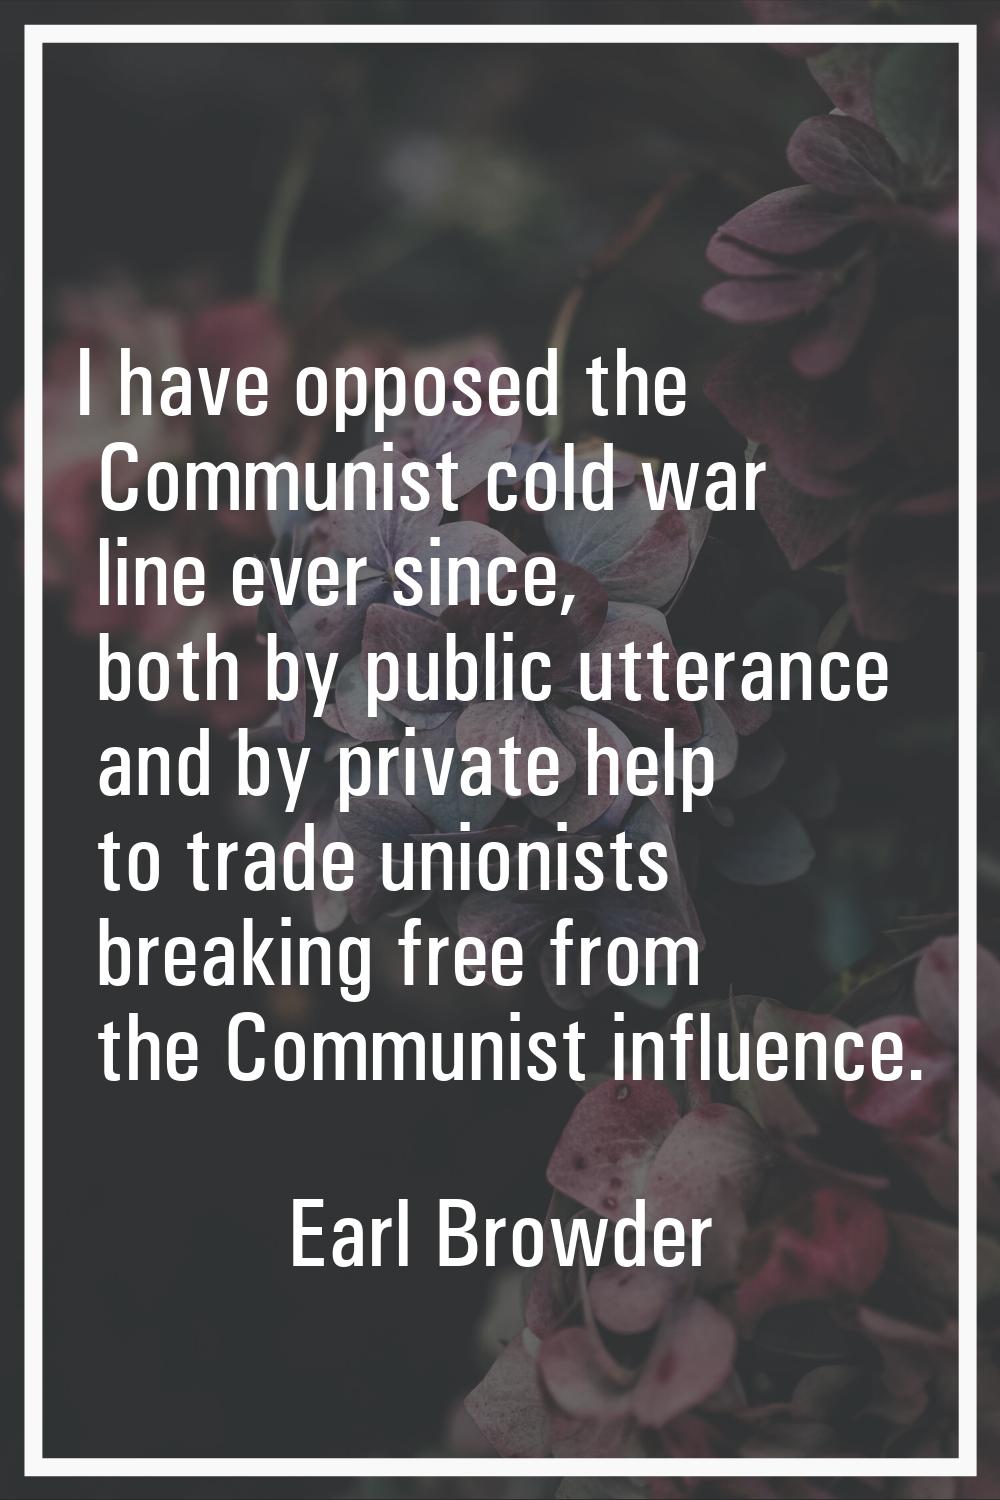 I have opposed the Communist cold war line ever since, both by public utterance and by private help